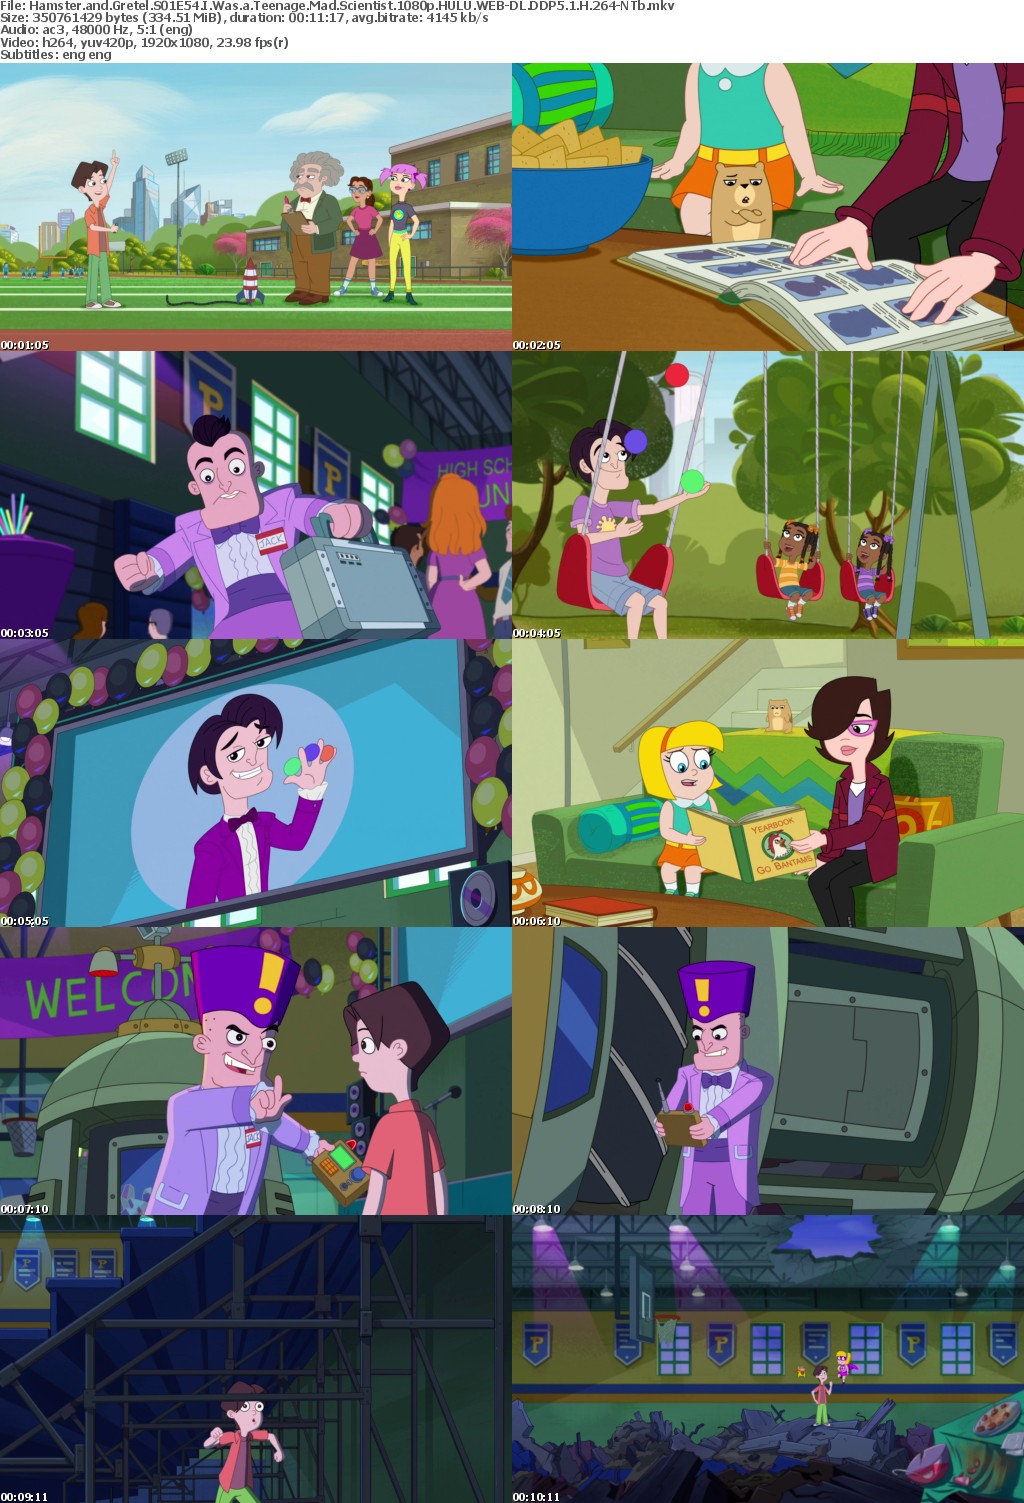 Hamster and Gretel S01E54 I Was a Teenage Mad Scientist 1080p HULU WEB-DL DDP5 1 H 264-NTb